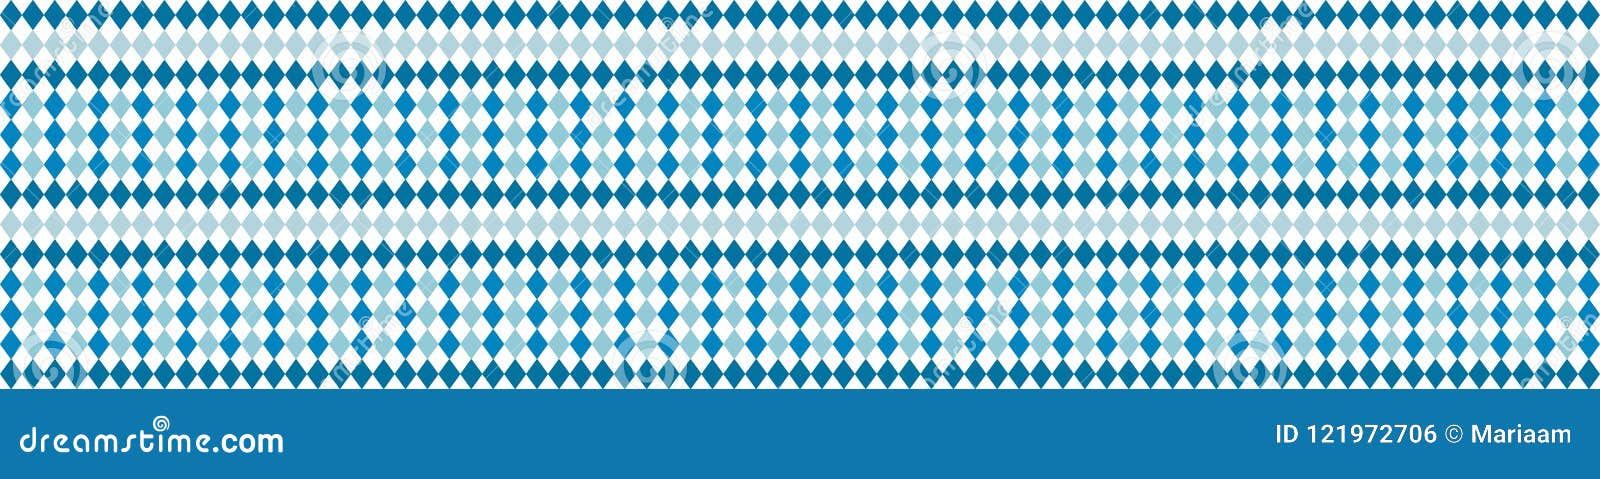 rustic banner for oktoberfest. traditional white and blue rhombus pattern.  banner.